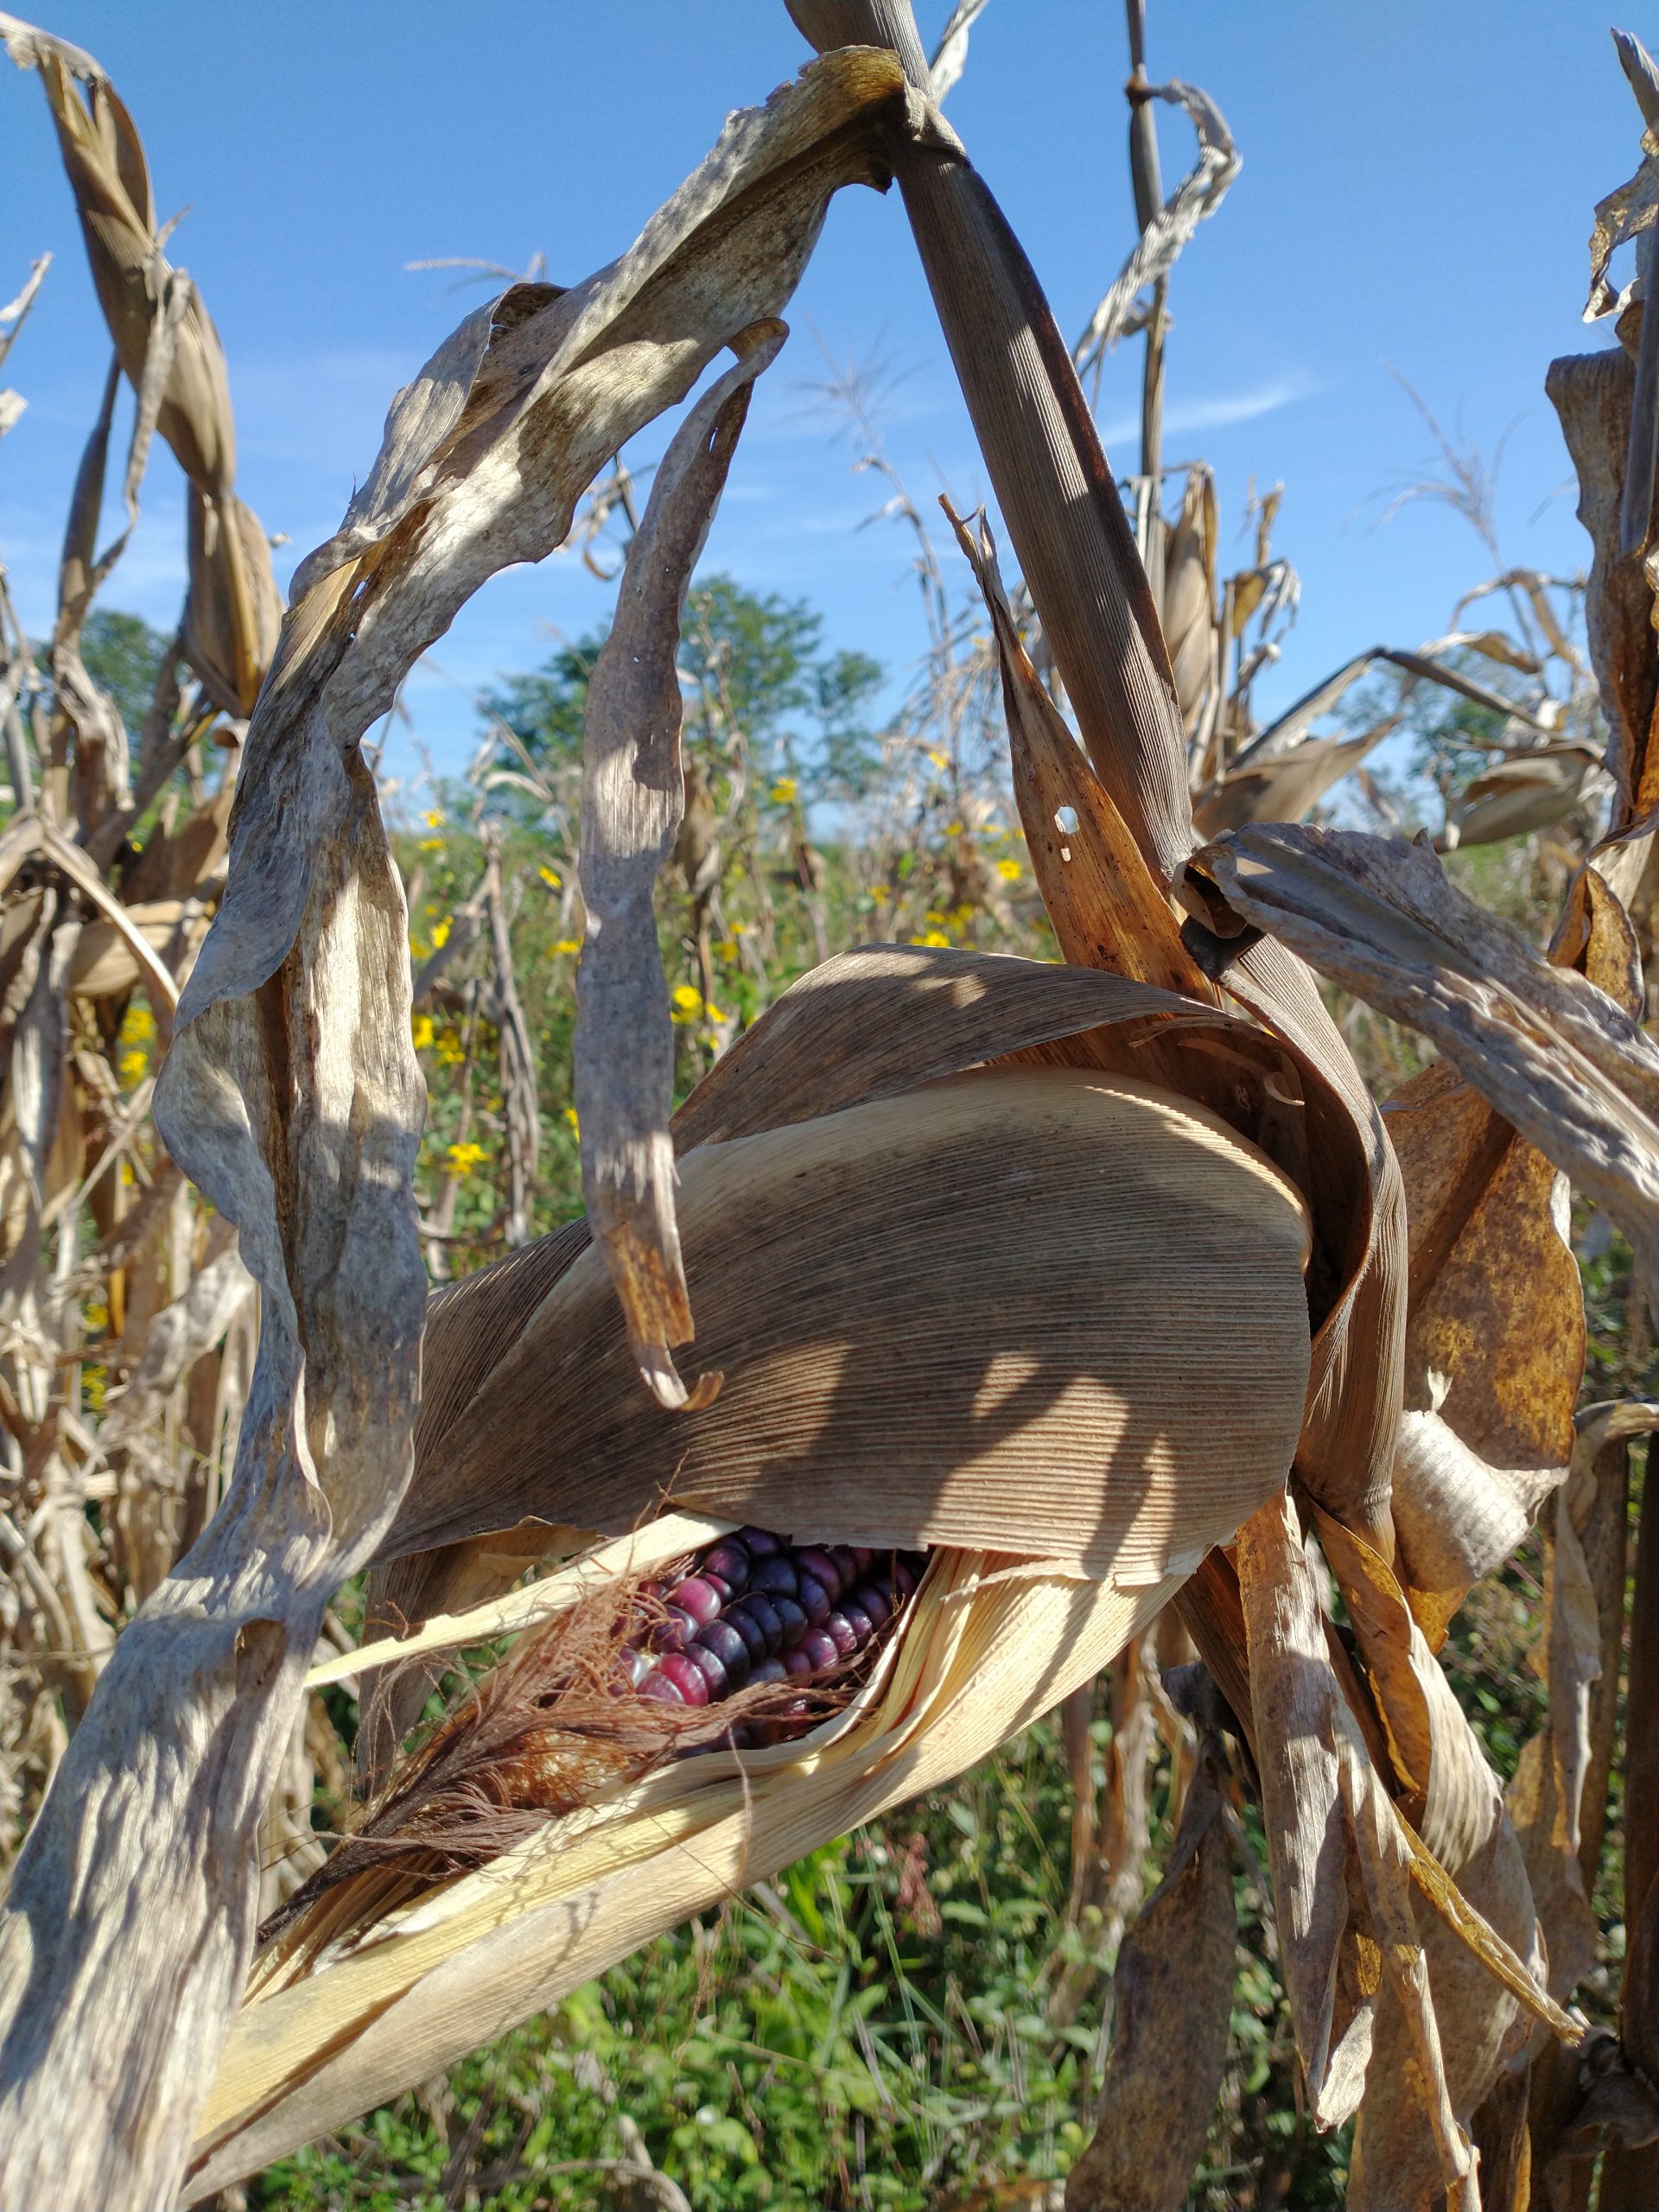 Local purple maize variety called Eh-Jub cultivated and ready to be harvested in a milpa in Maxcanu community in Western Yucatan - by Karla G. Hernandez-Aguilar